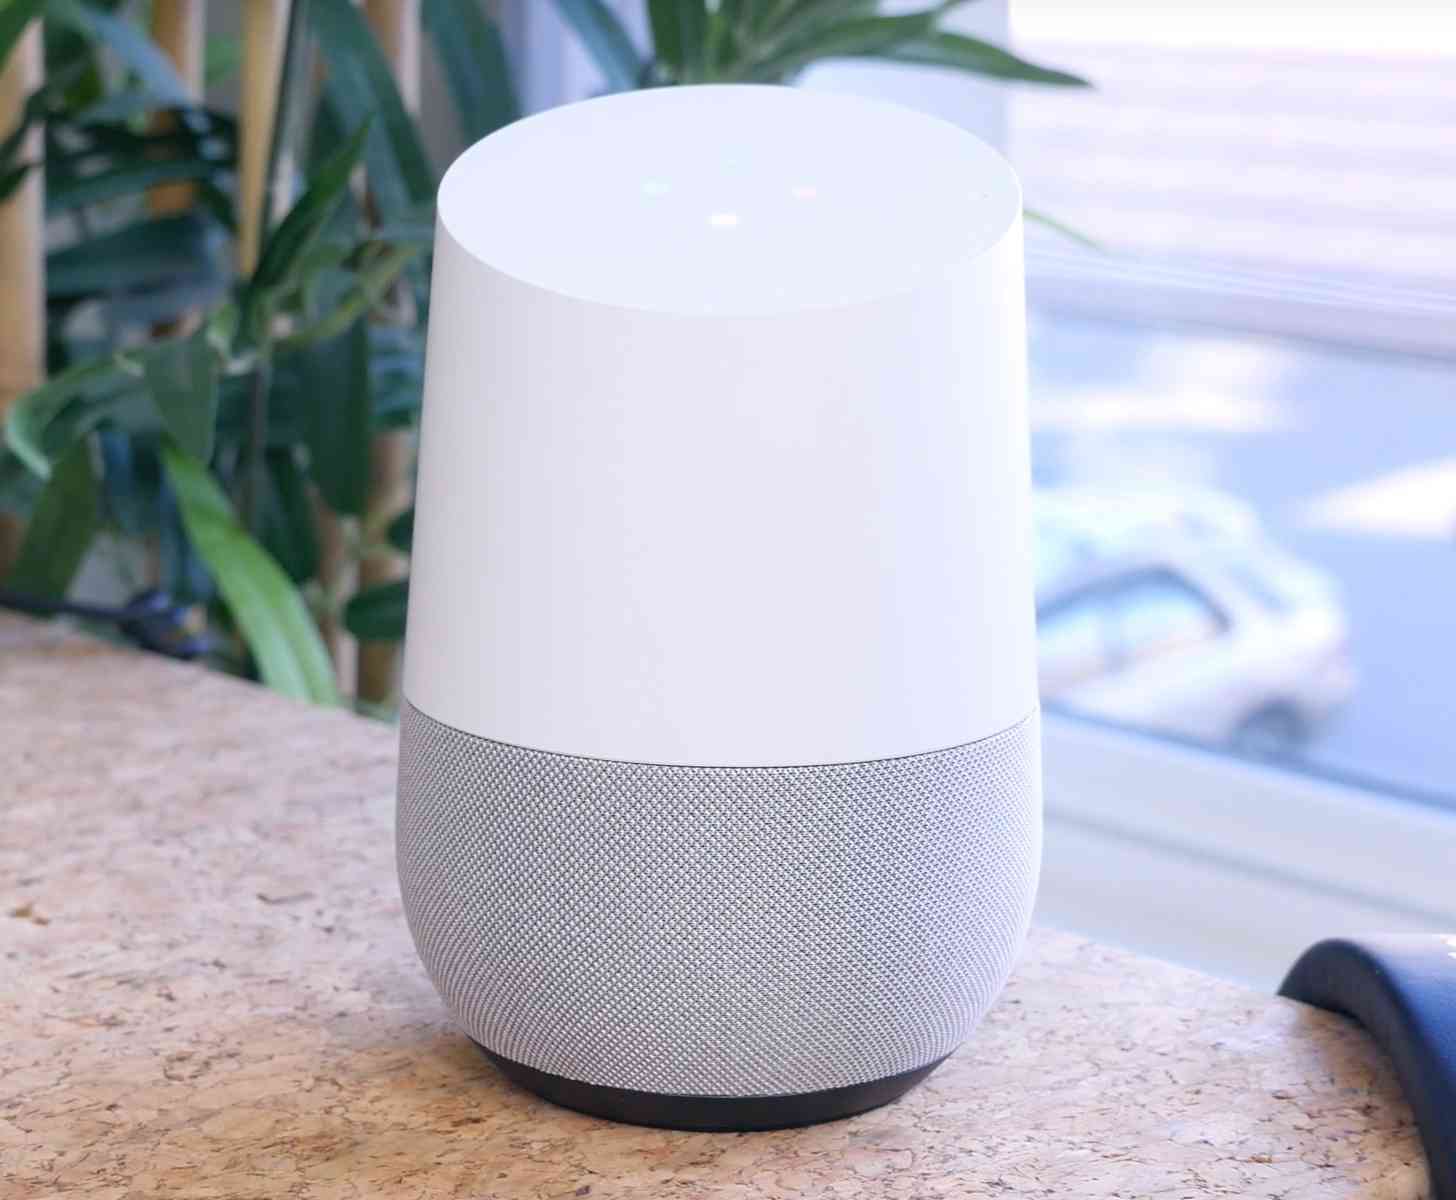 Google Home hands-on unboxing